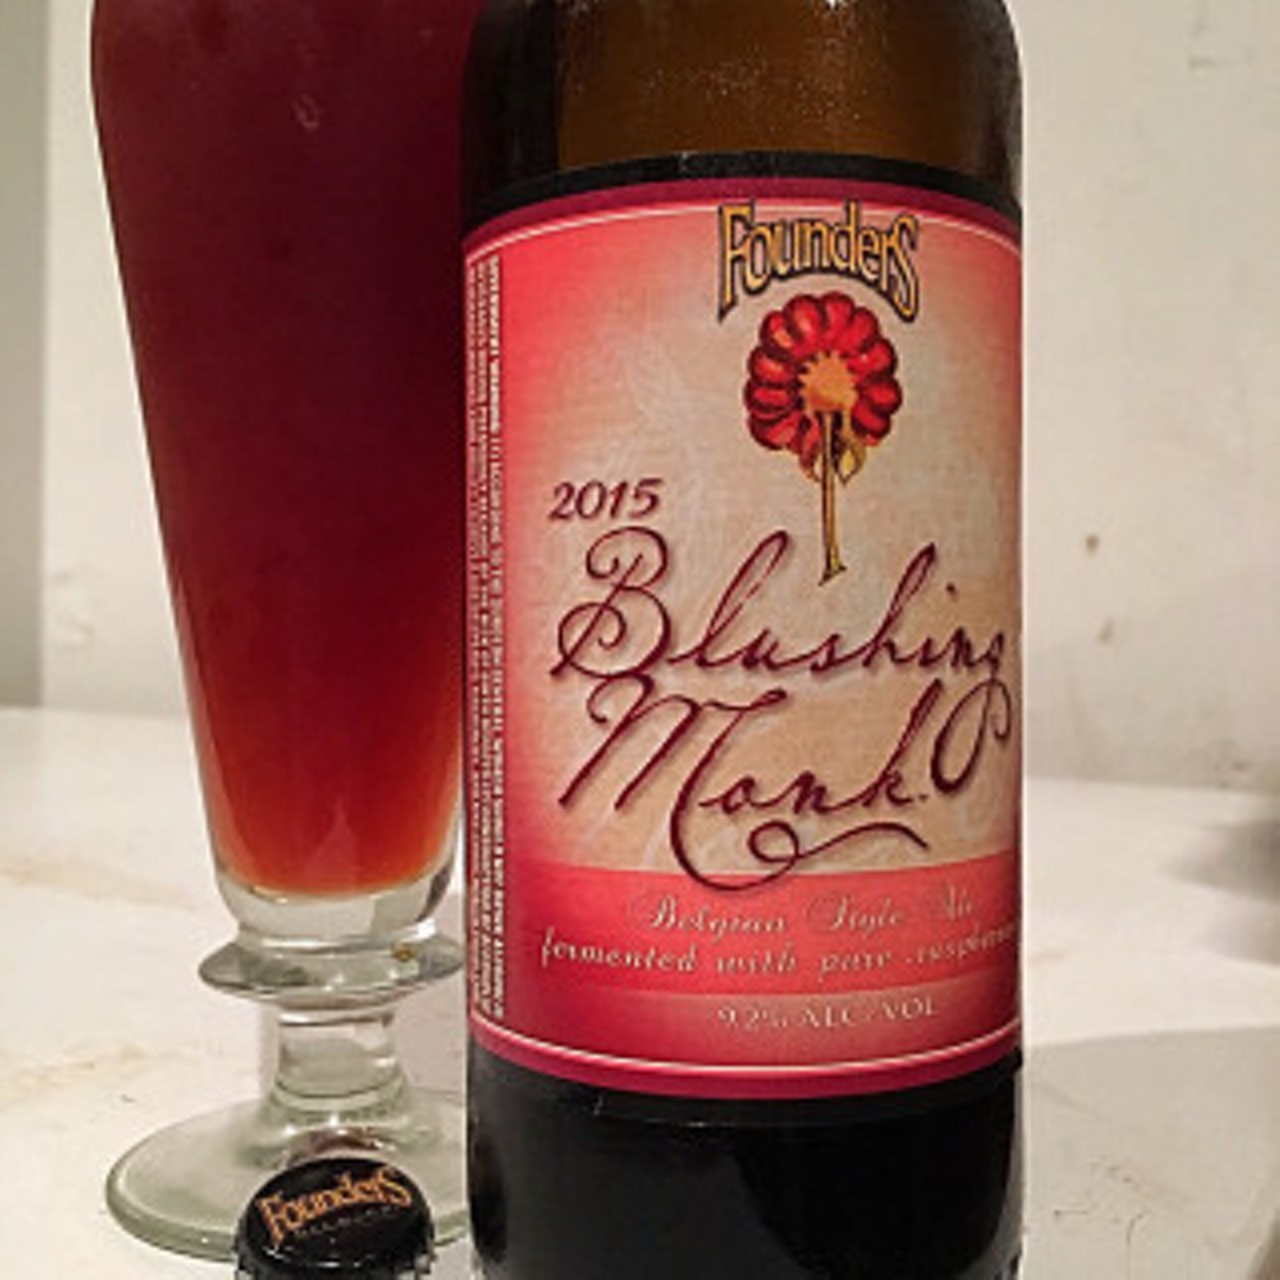 Blushing Monk - Founder's 
ABV: 9.2% 
Described as a dessert beer, Blushing Monk by Founder's in Grand Rapids is brewed with lots of raspberries to give it a fresh and natural flavor. The taste lies on the sweet side, but with a ABV of 9.2 percent, one is enough.